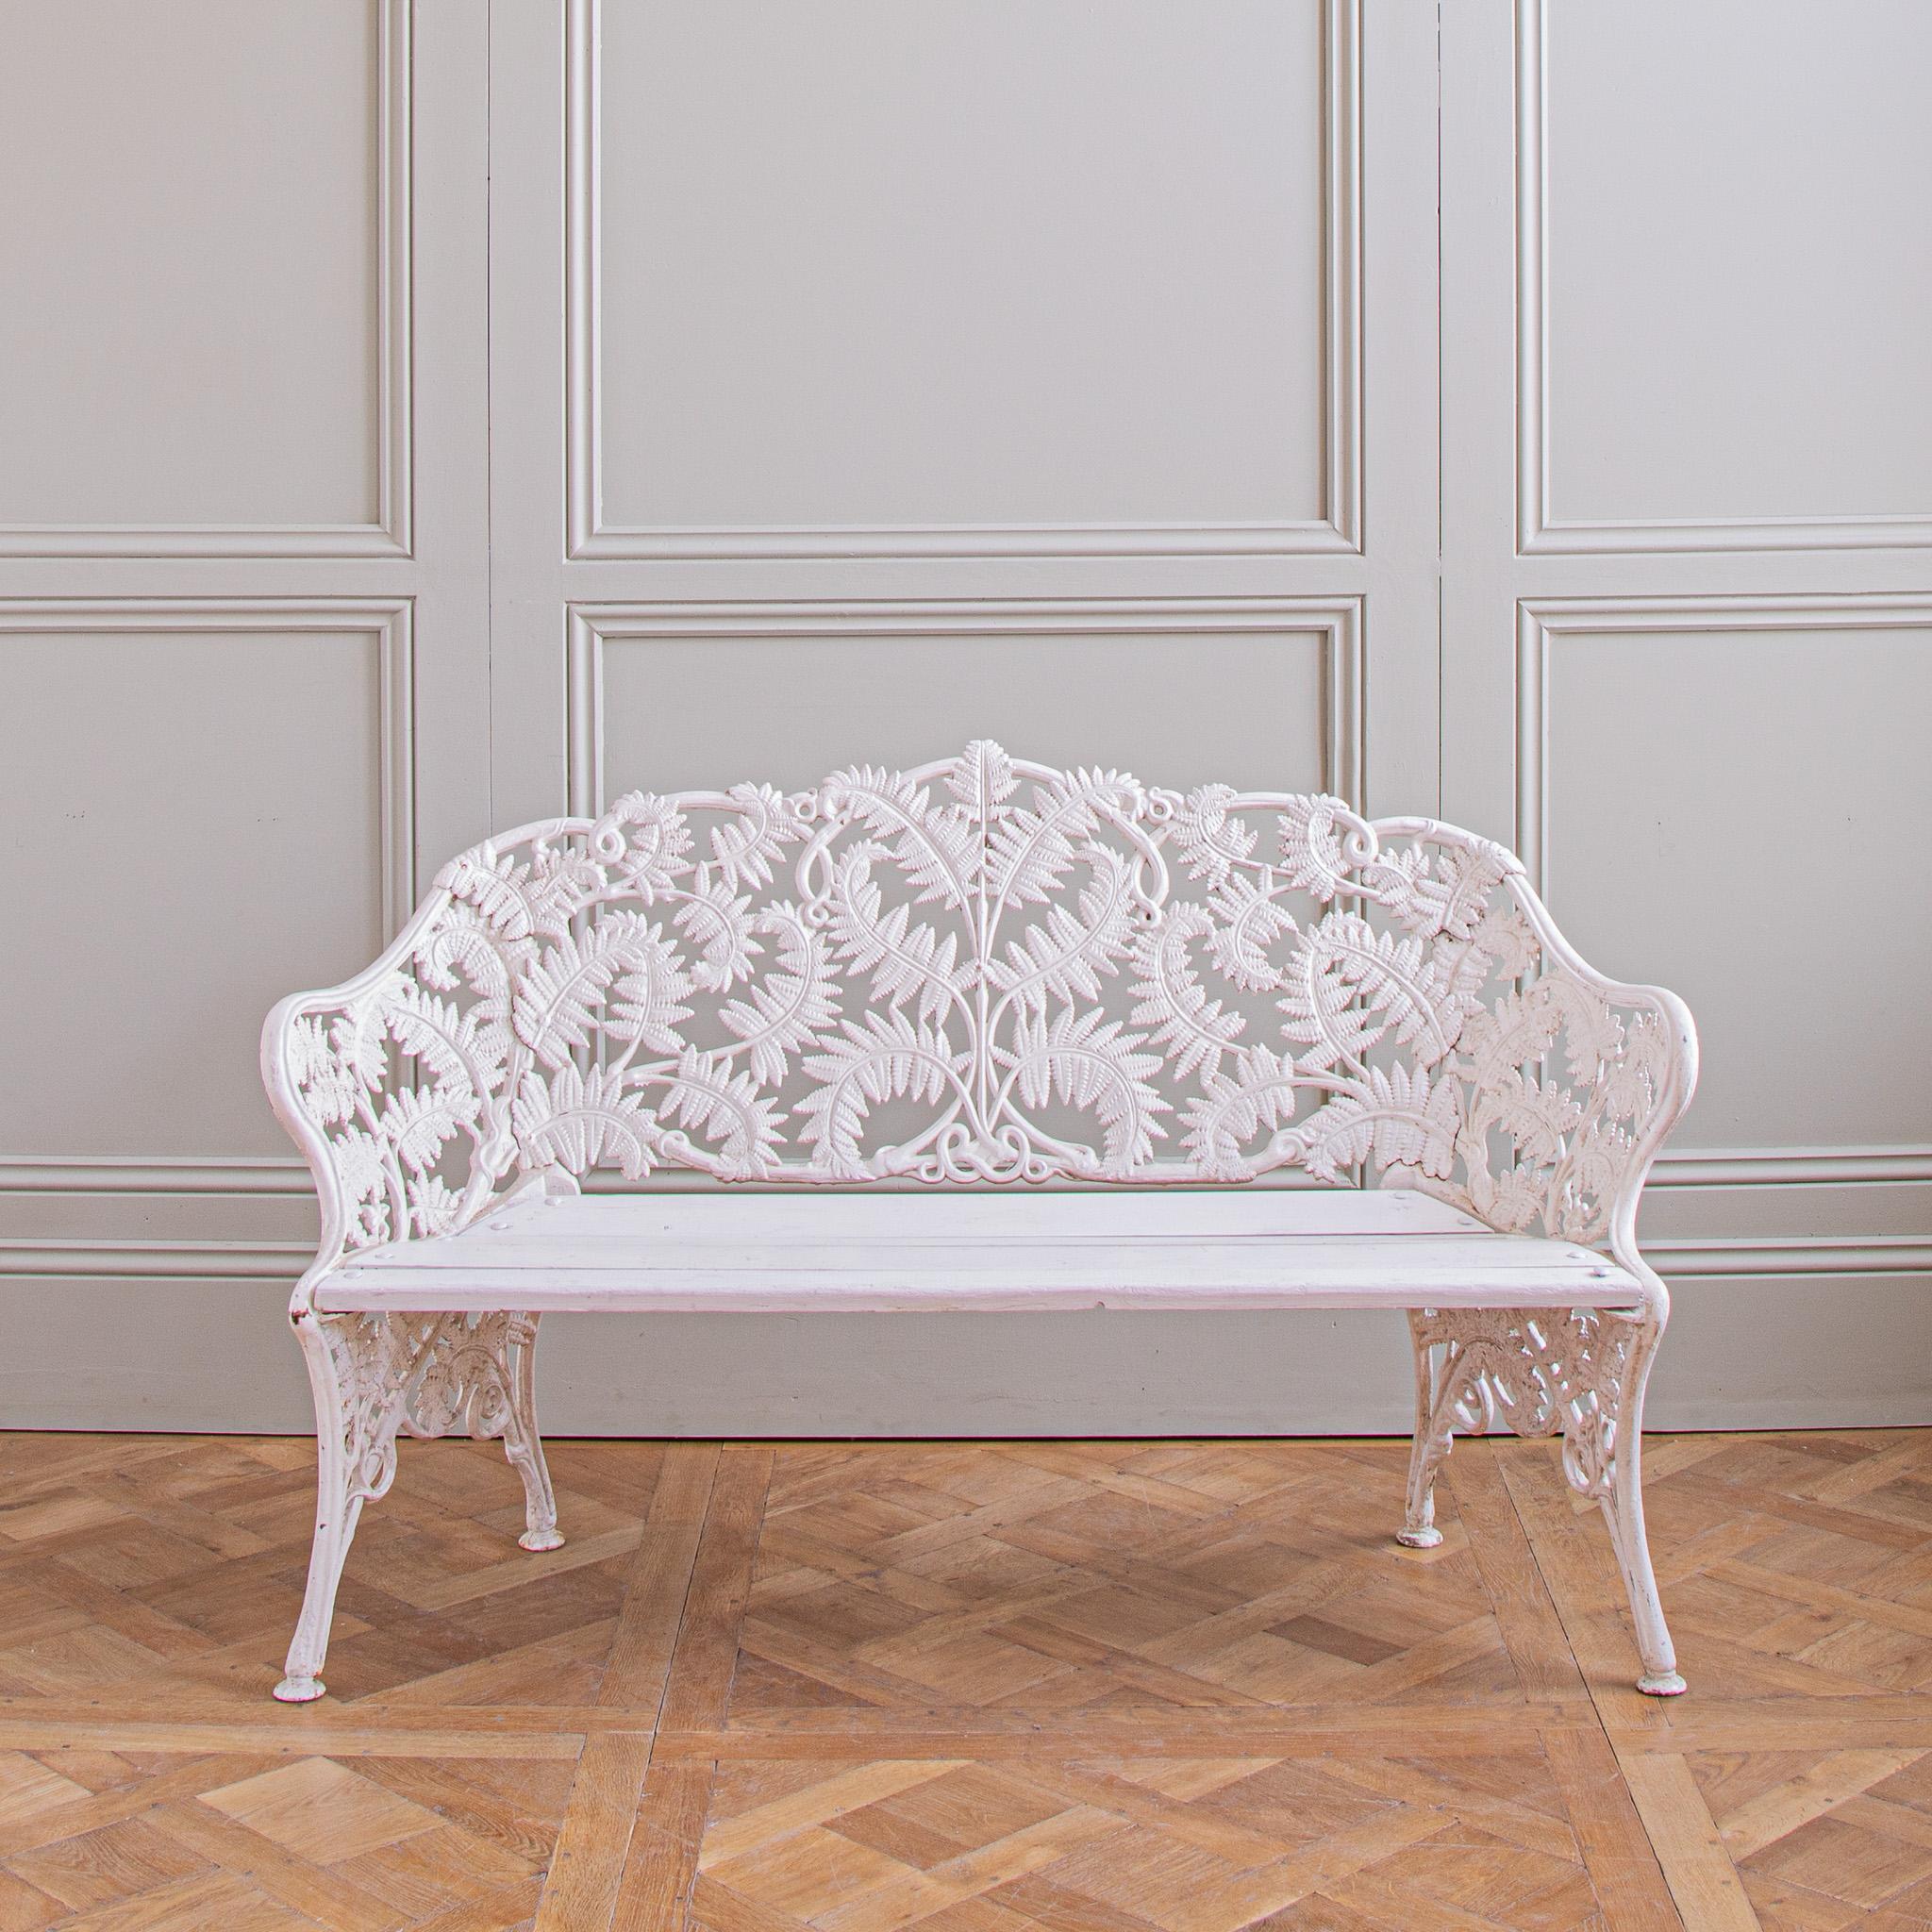 An antique, cast iron garden bench, circa 1920. The fern motifs on this particular design, bought in the South of France, are more animated and lively than others of this type. The bench is a generous 2 seater and painted white.